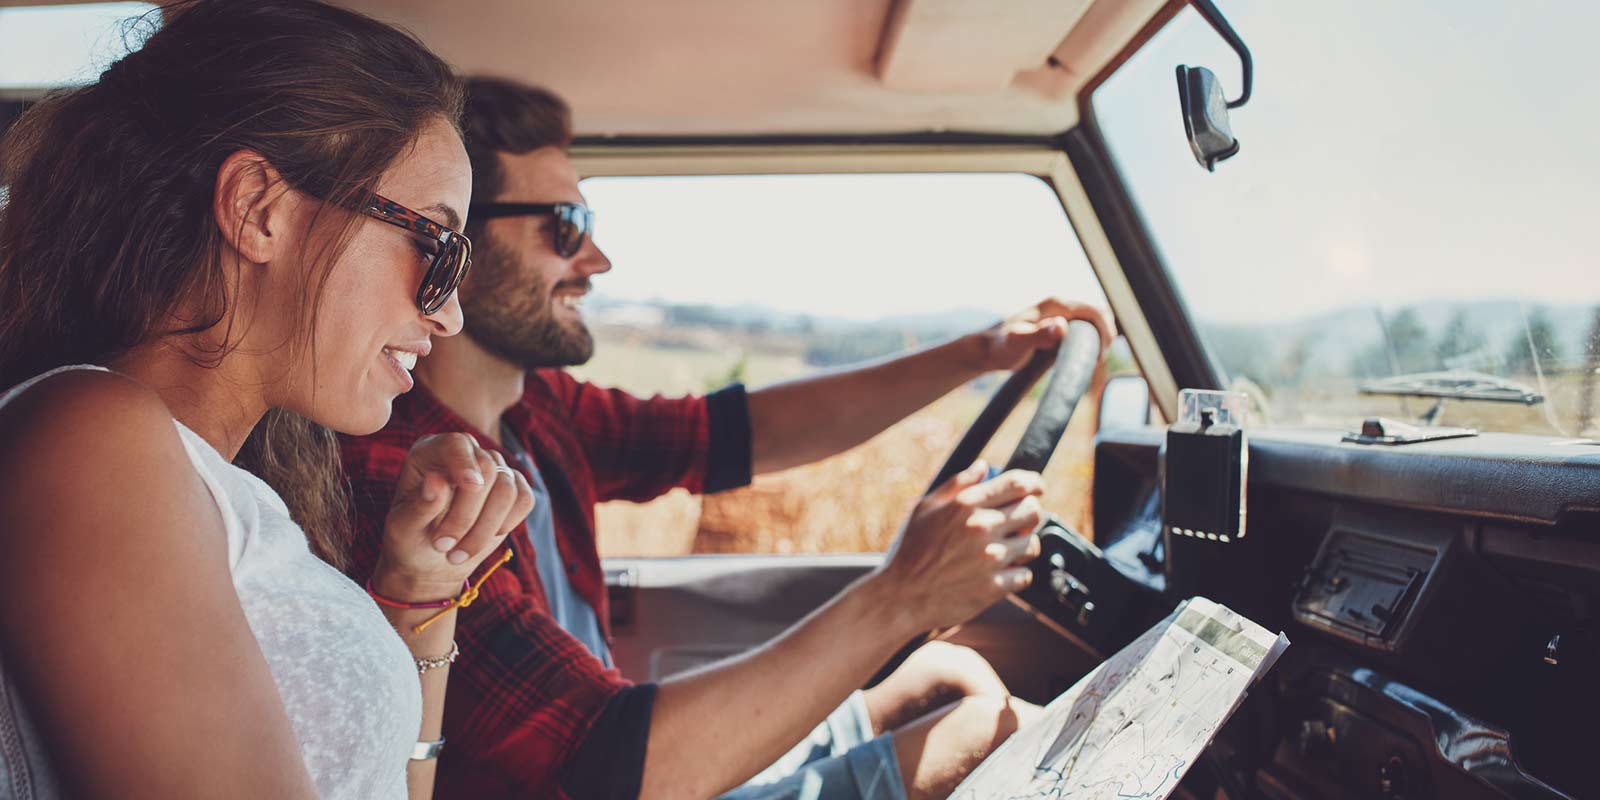 A young couple smile as they drive through the country together with a map in hand.